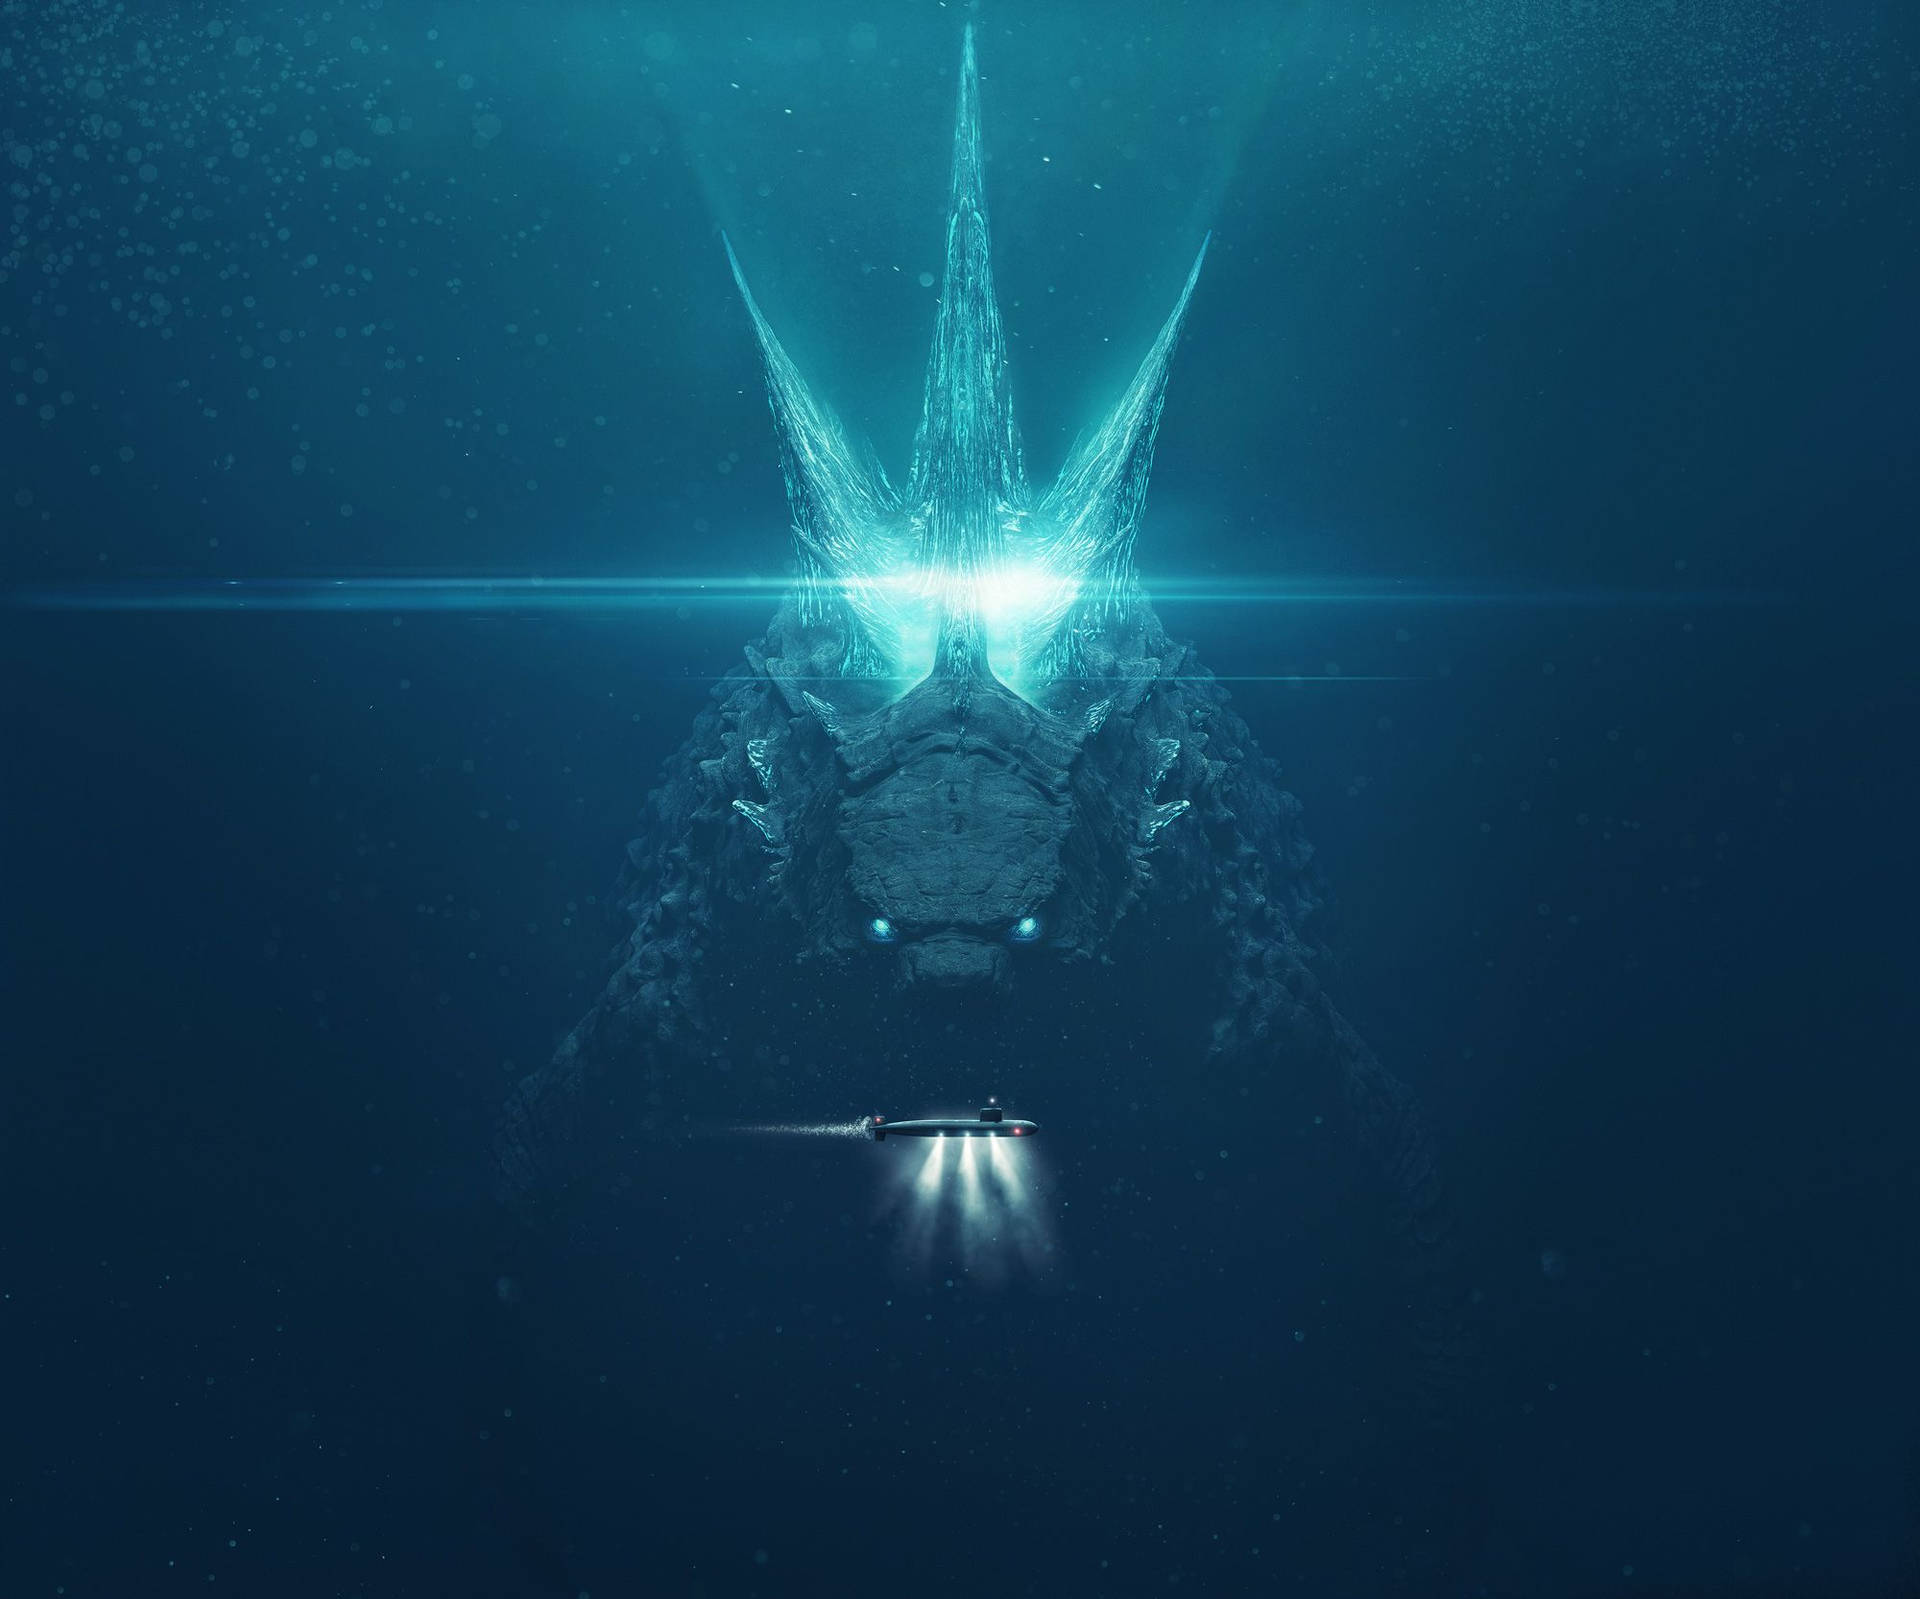 Get Ready To Rumble - Godzilla King Of The Monsters Wallpaper